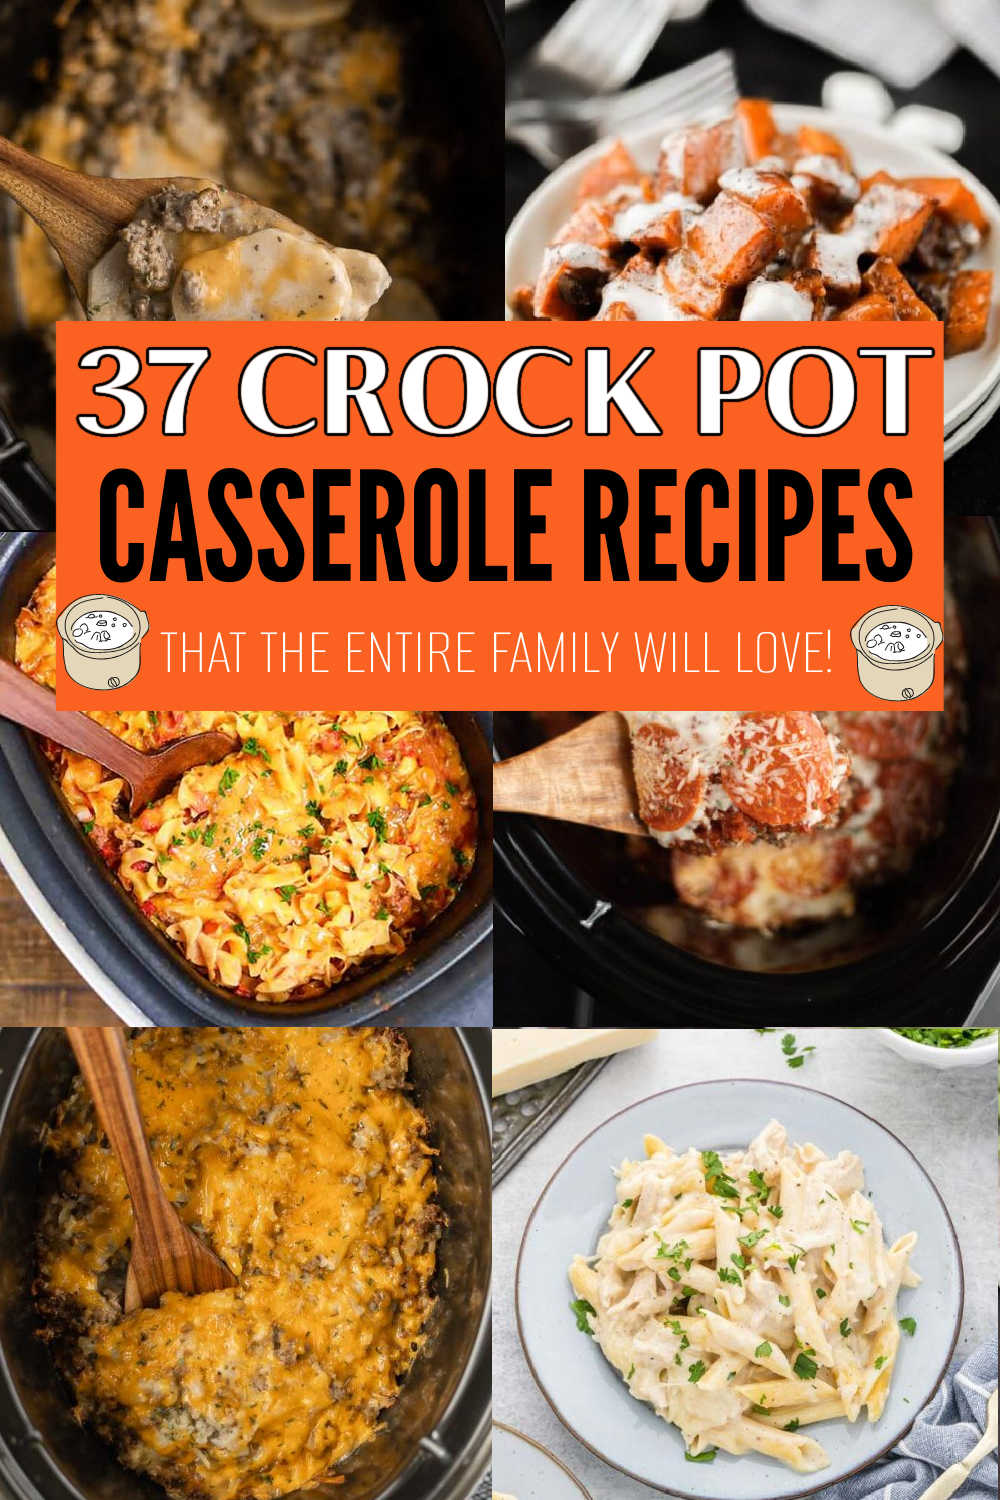 15 Easy Recipes for your Casserole Slow Cooker - Slow Cooker Gourmet